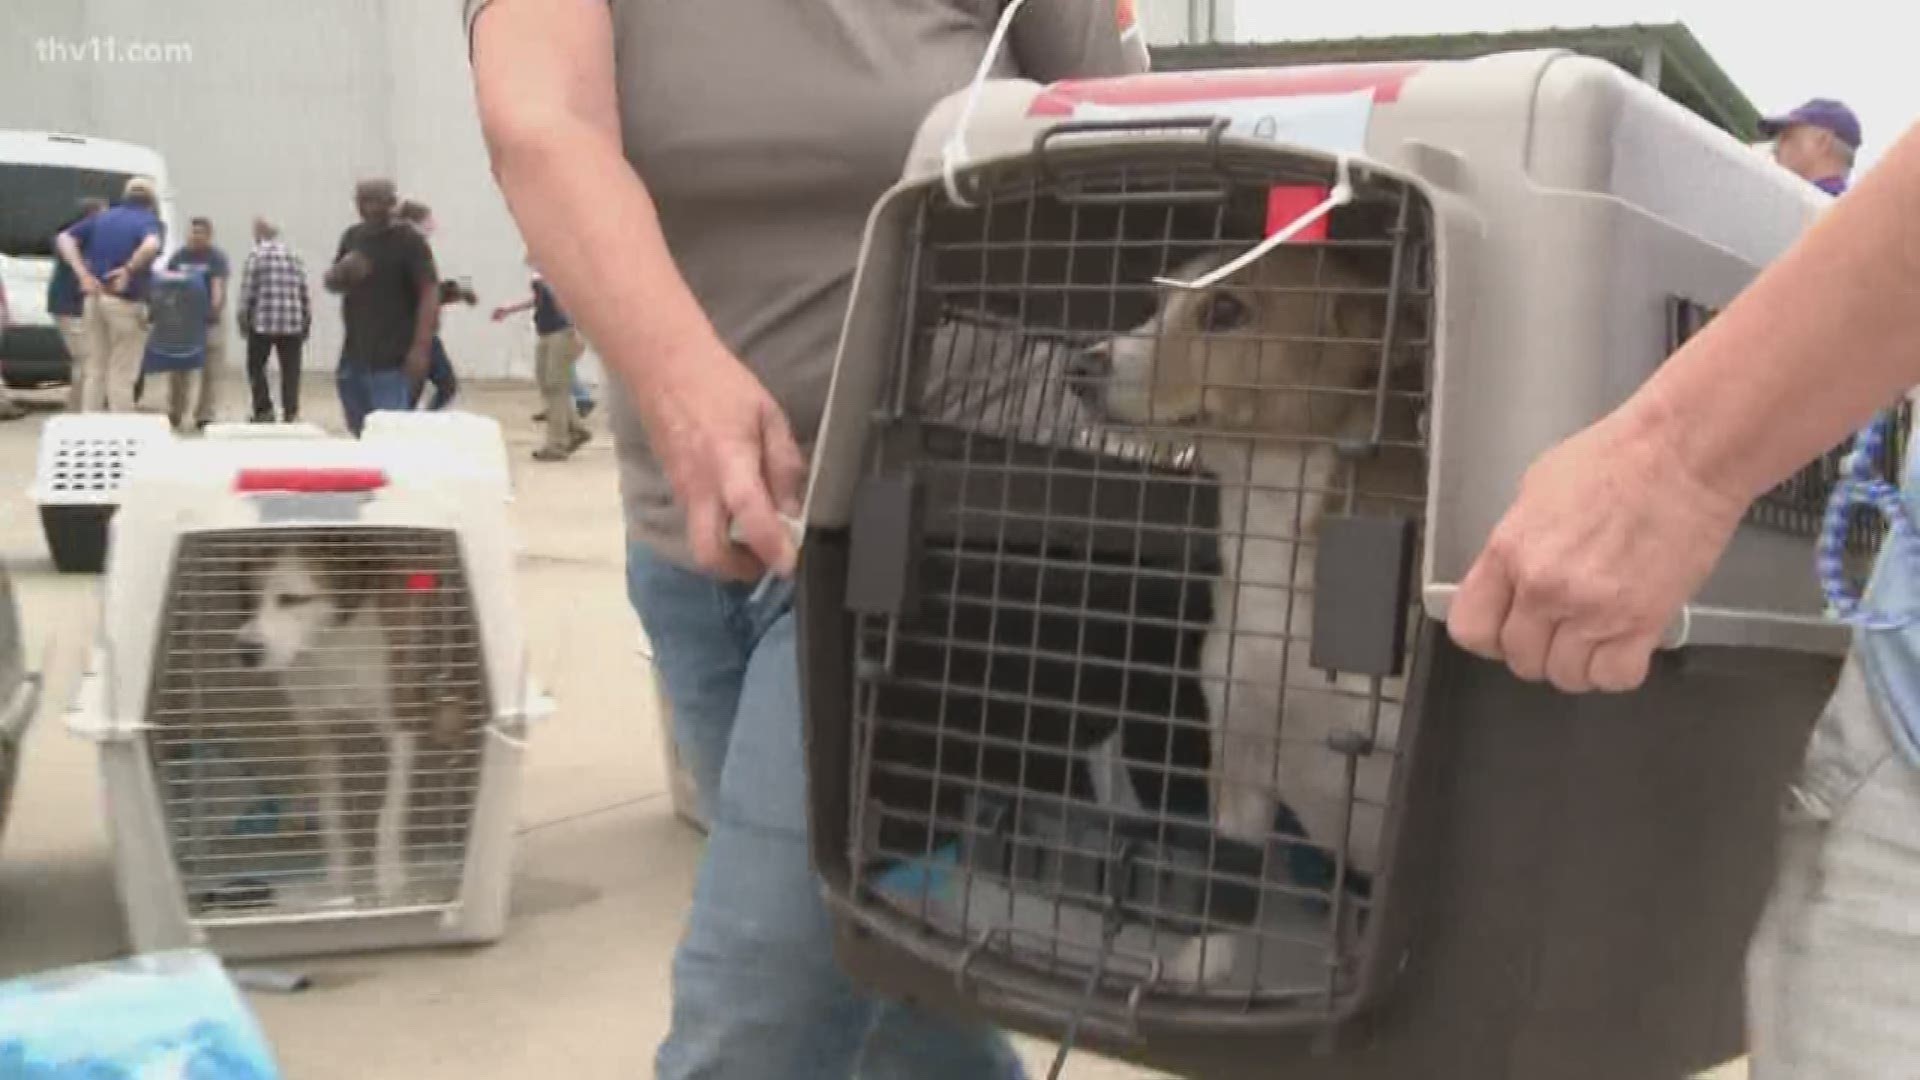 They were helping send abandoned pets to a better future and giving a little more hope to families affected by flooding.